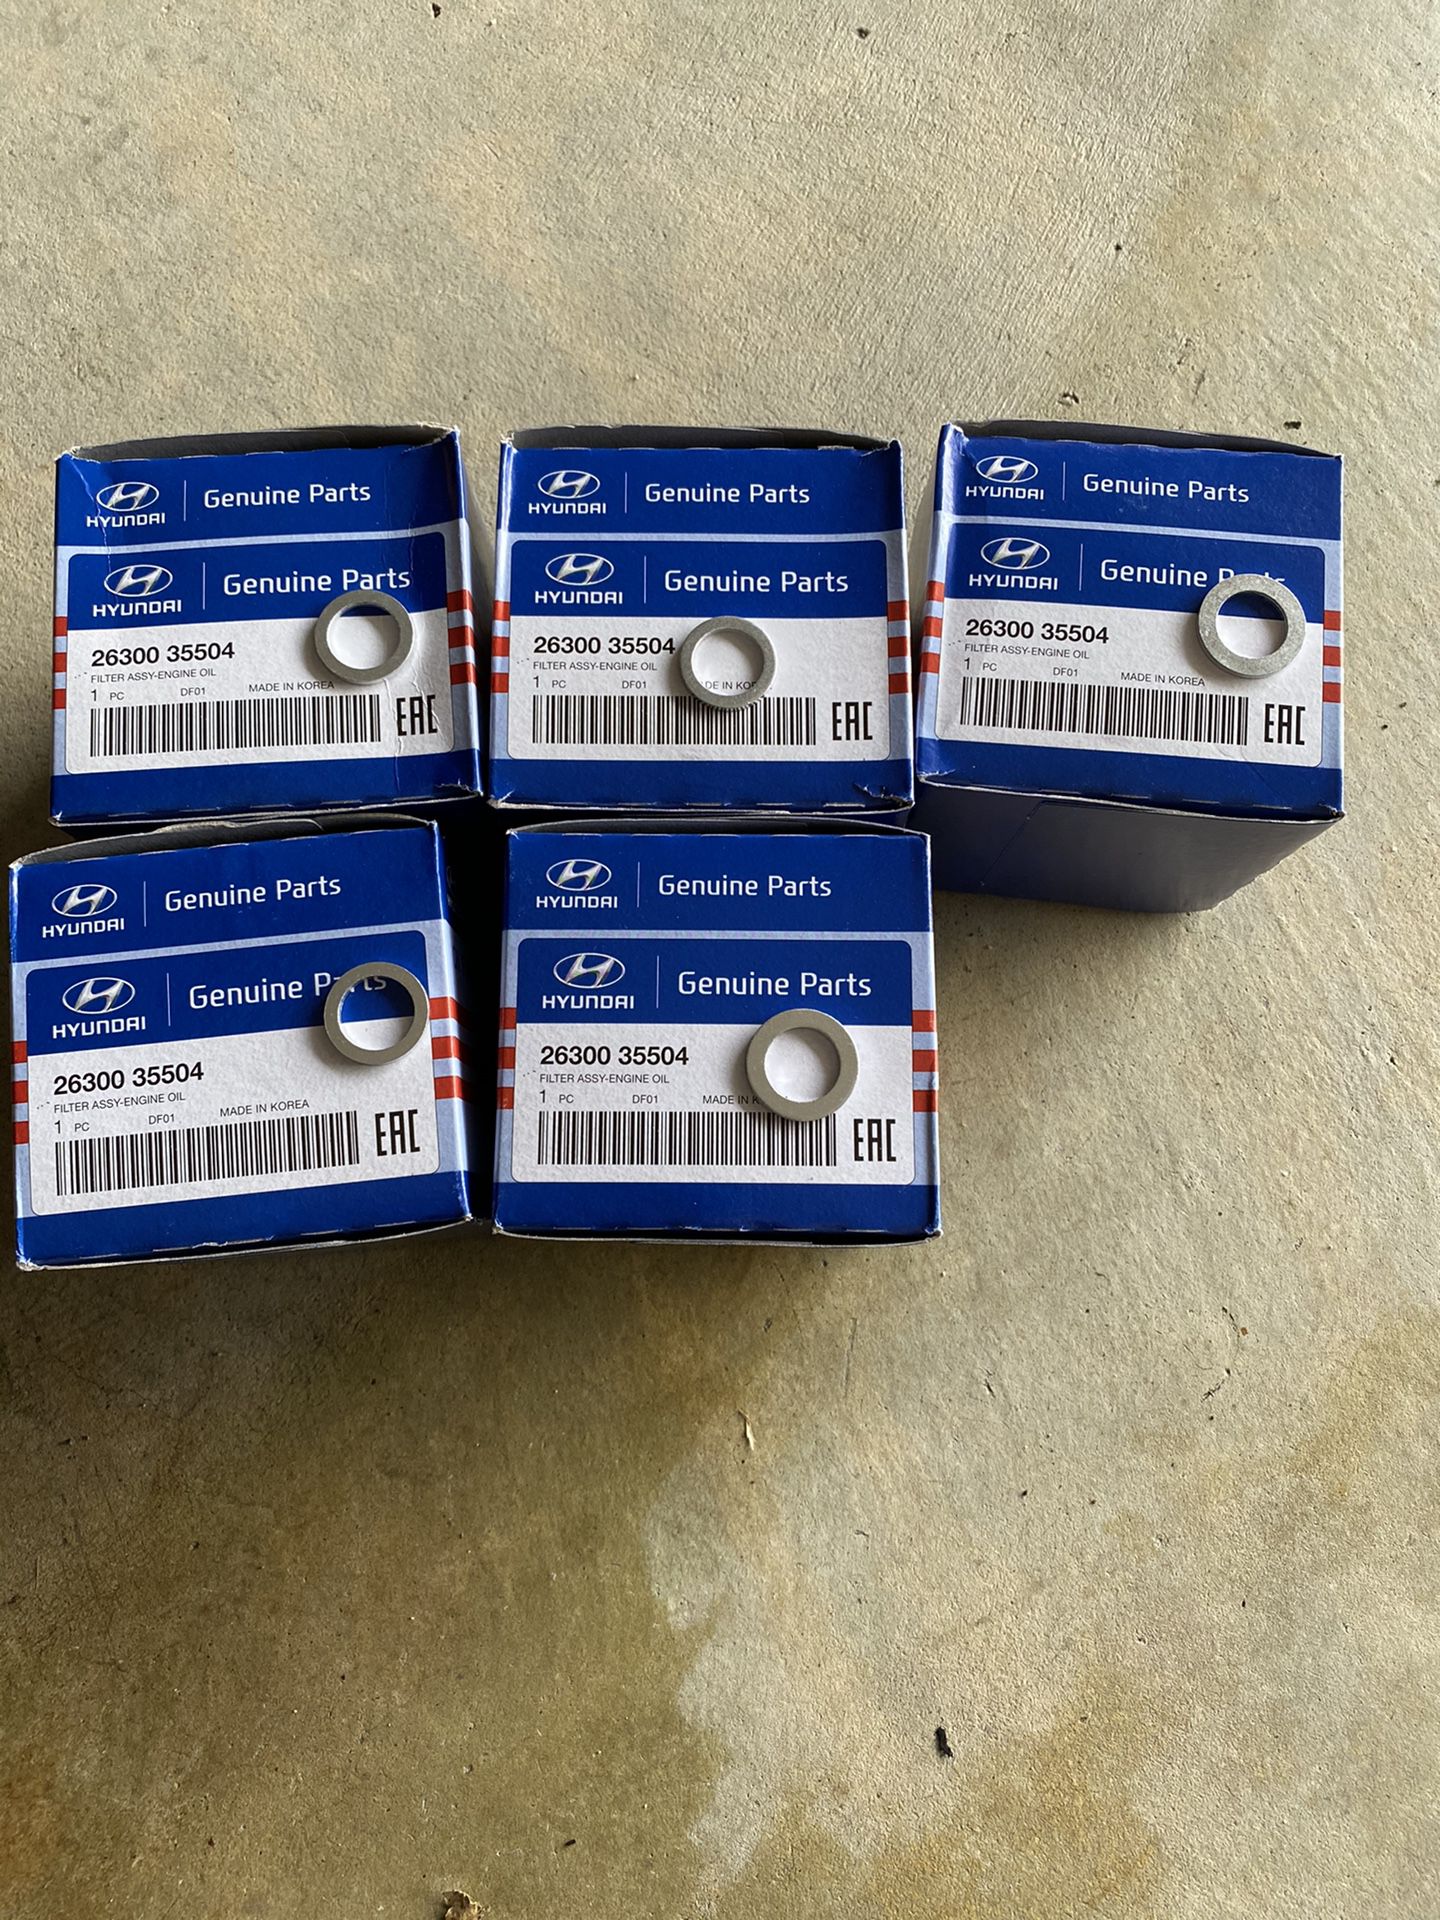 FS: (5) Brand New Hyundai OEM Oil Filter with Drain Plug Gaskets/Washers. Part #26300-35504